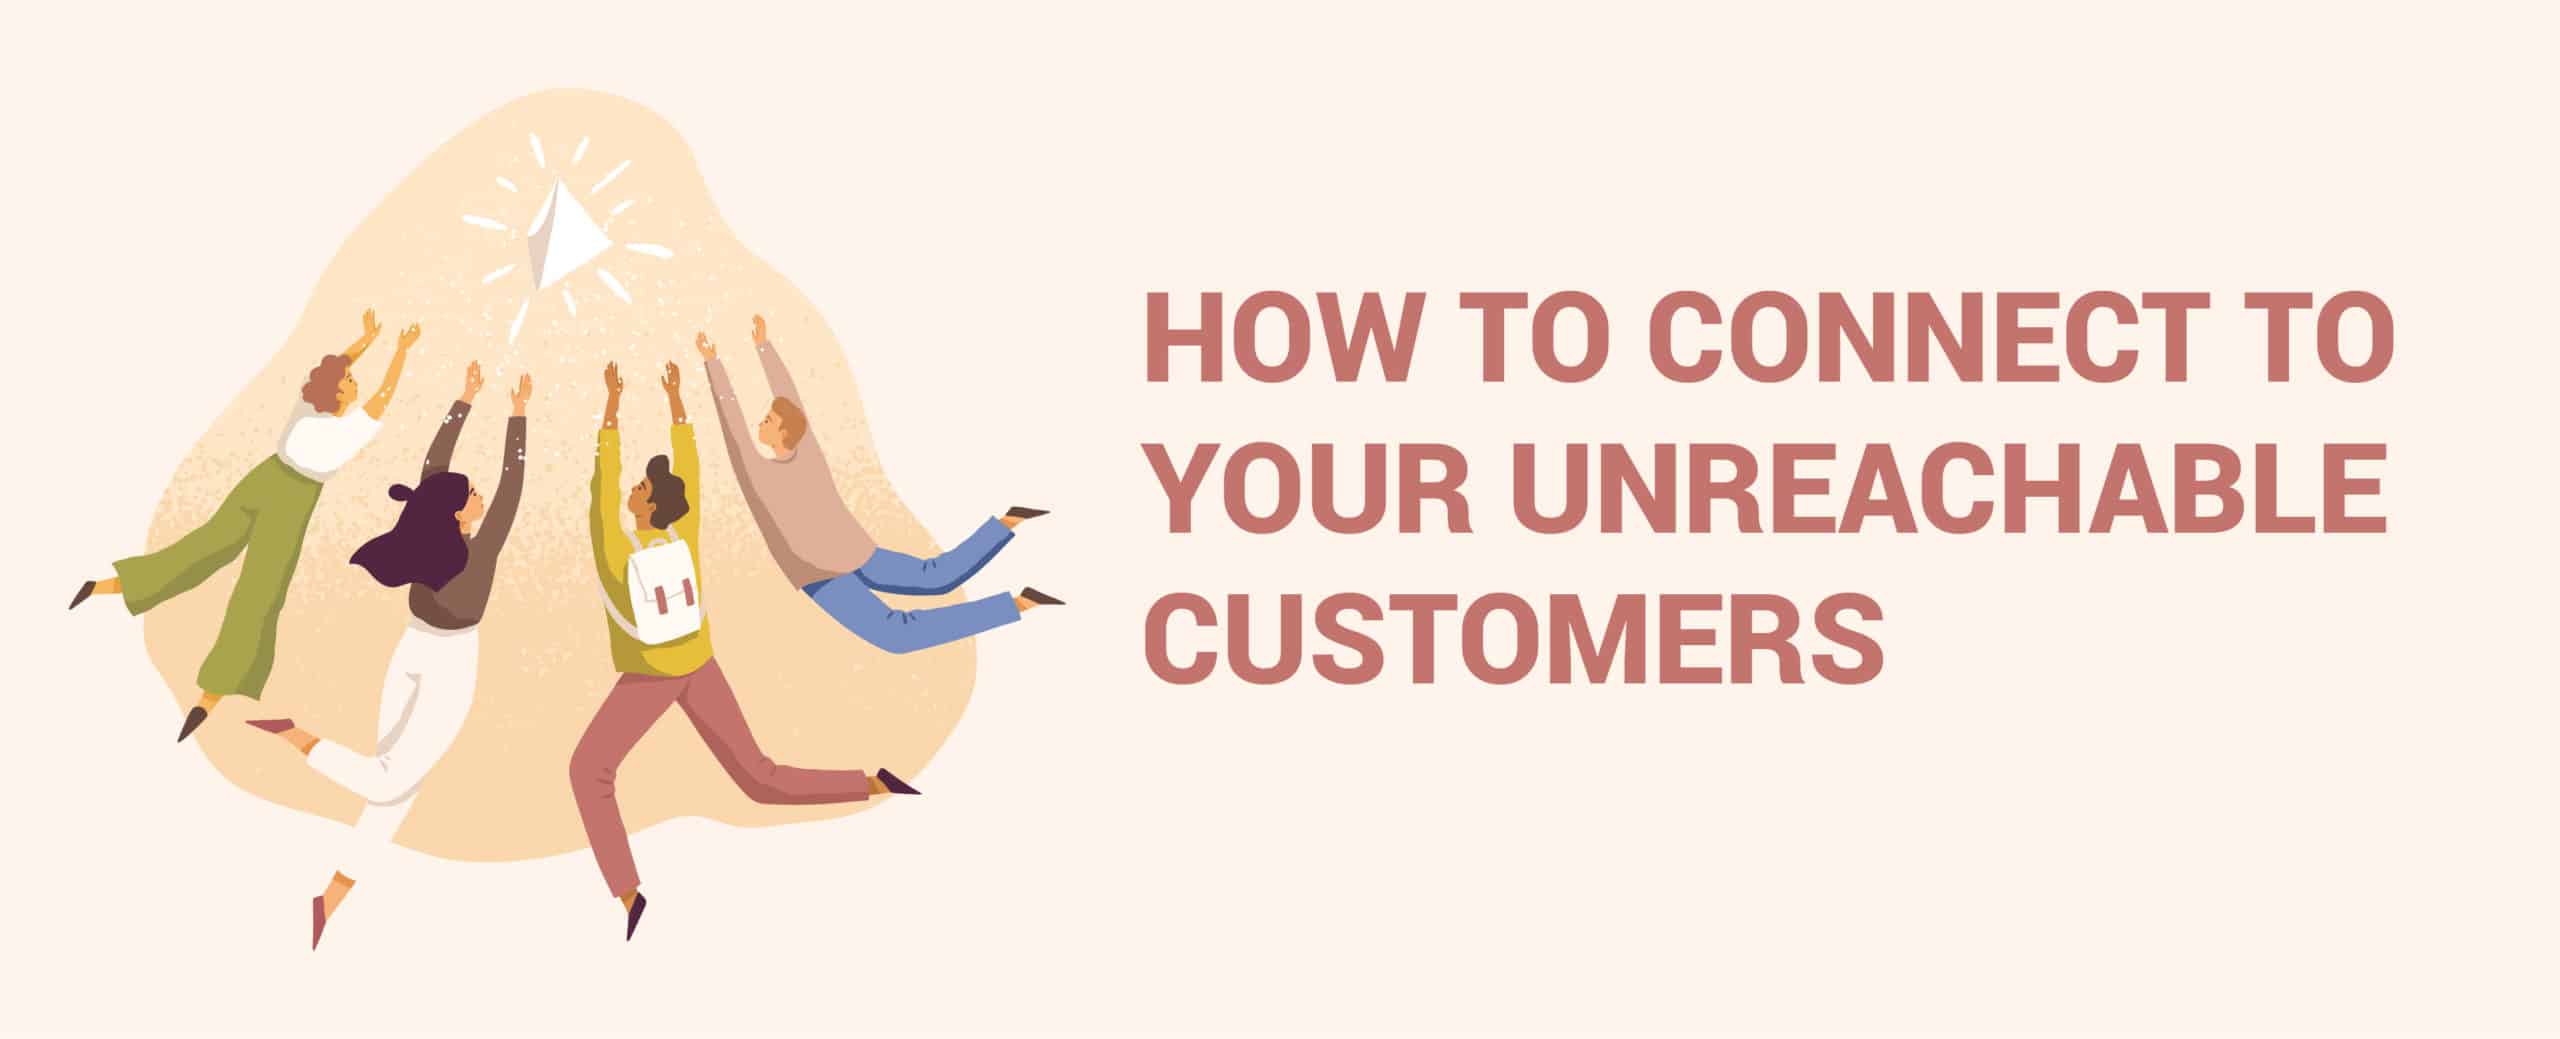 How to Connect to Your Unreachable Customers